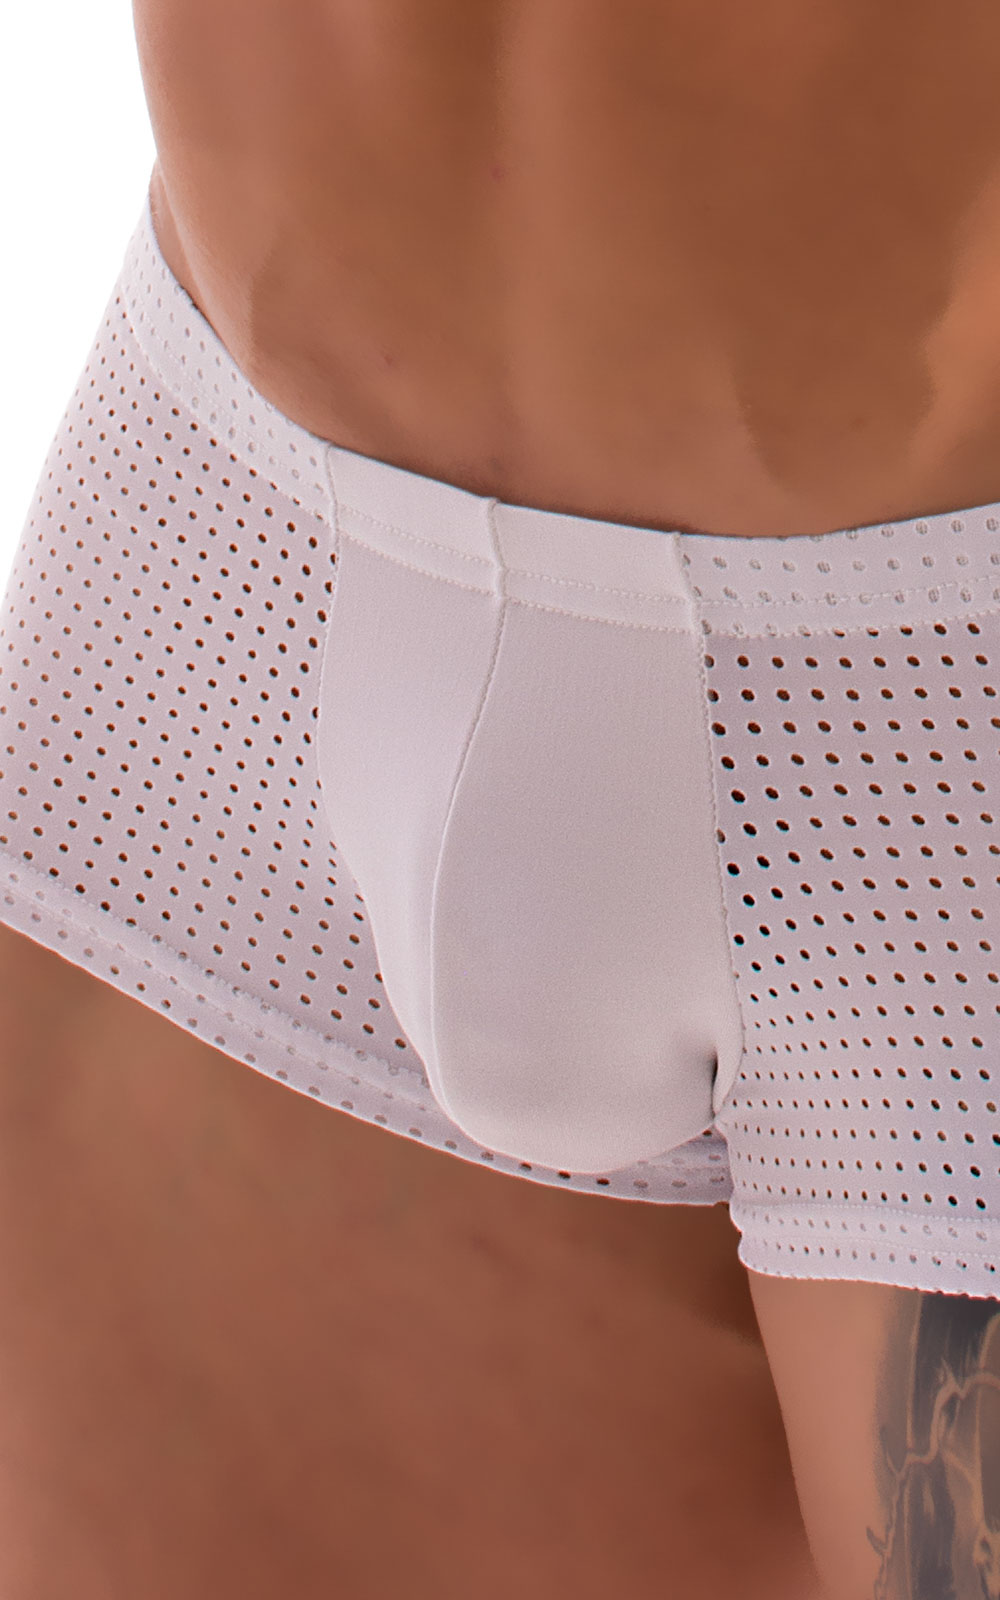 Fitted Pouch - Boxer - Swim Trunks in White and White Peep Show 6